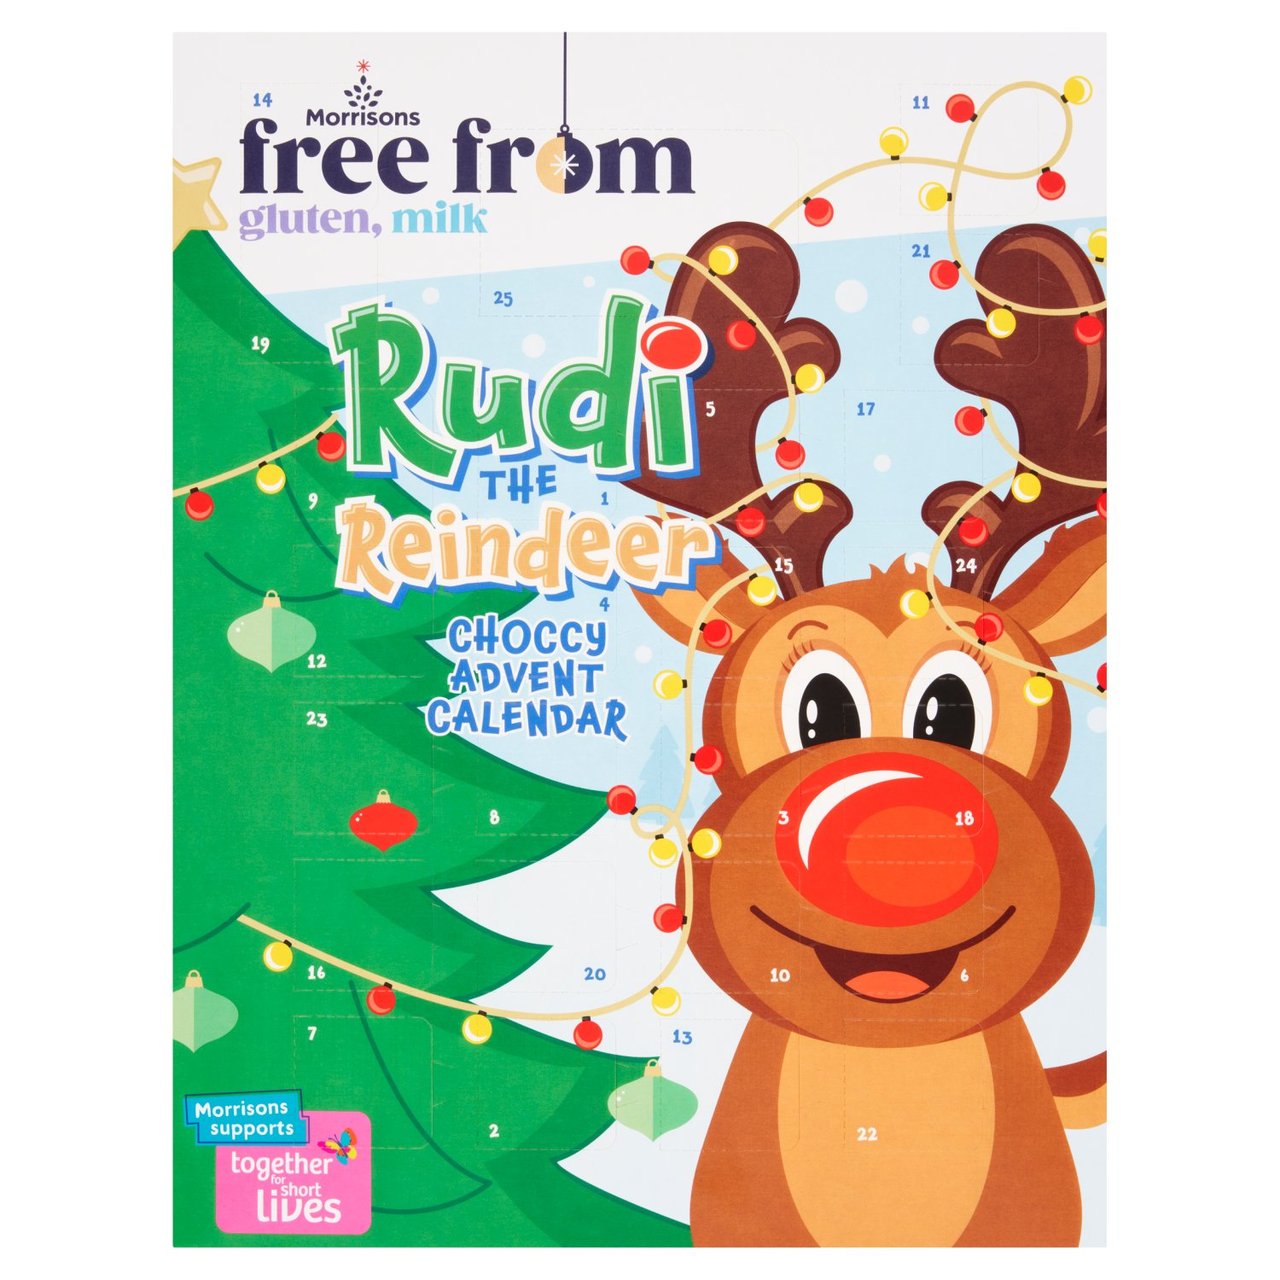 Morrisons gluten-free Christmas products 2023: free from rudi the reindeer choccy advent calendar